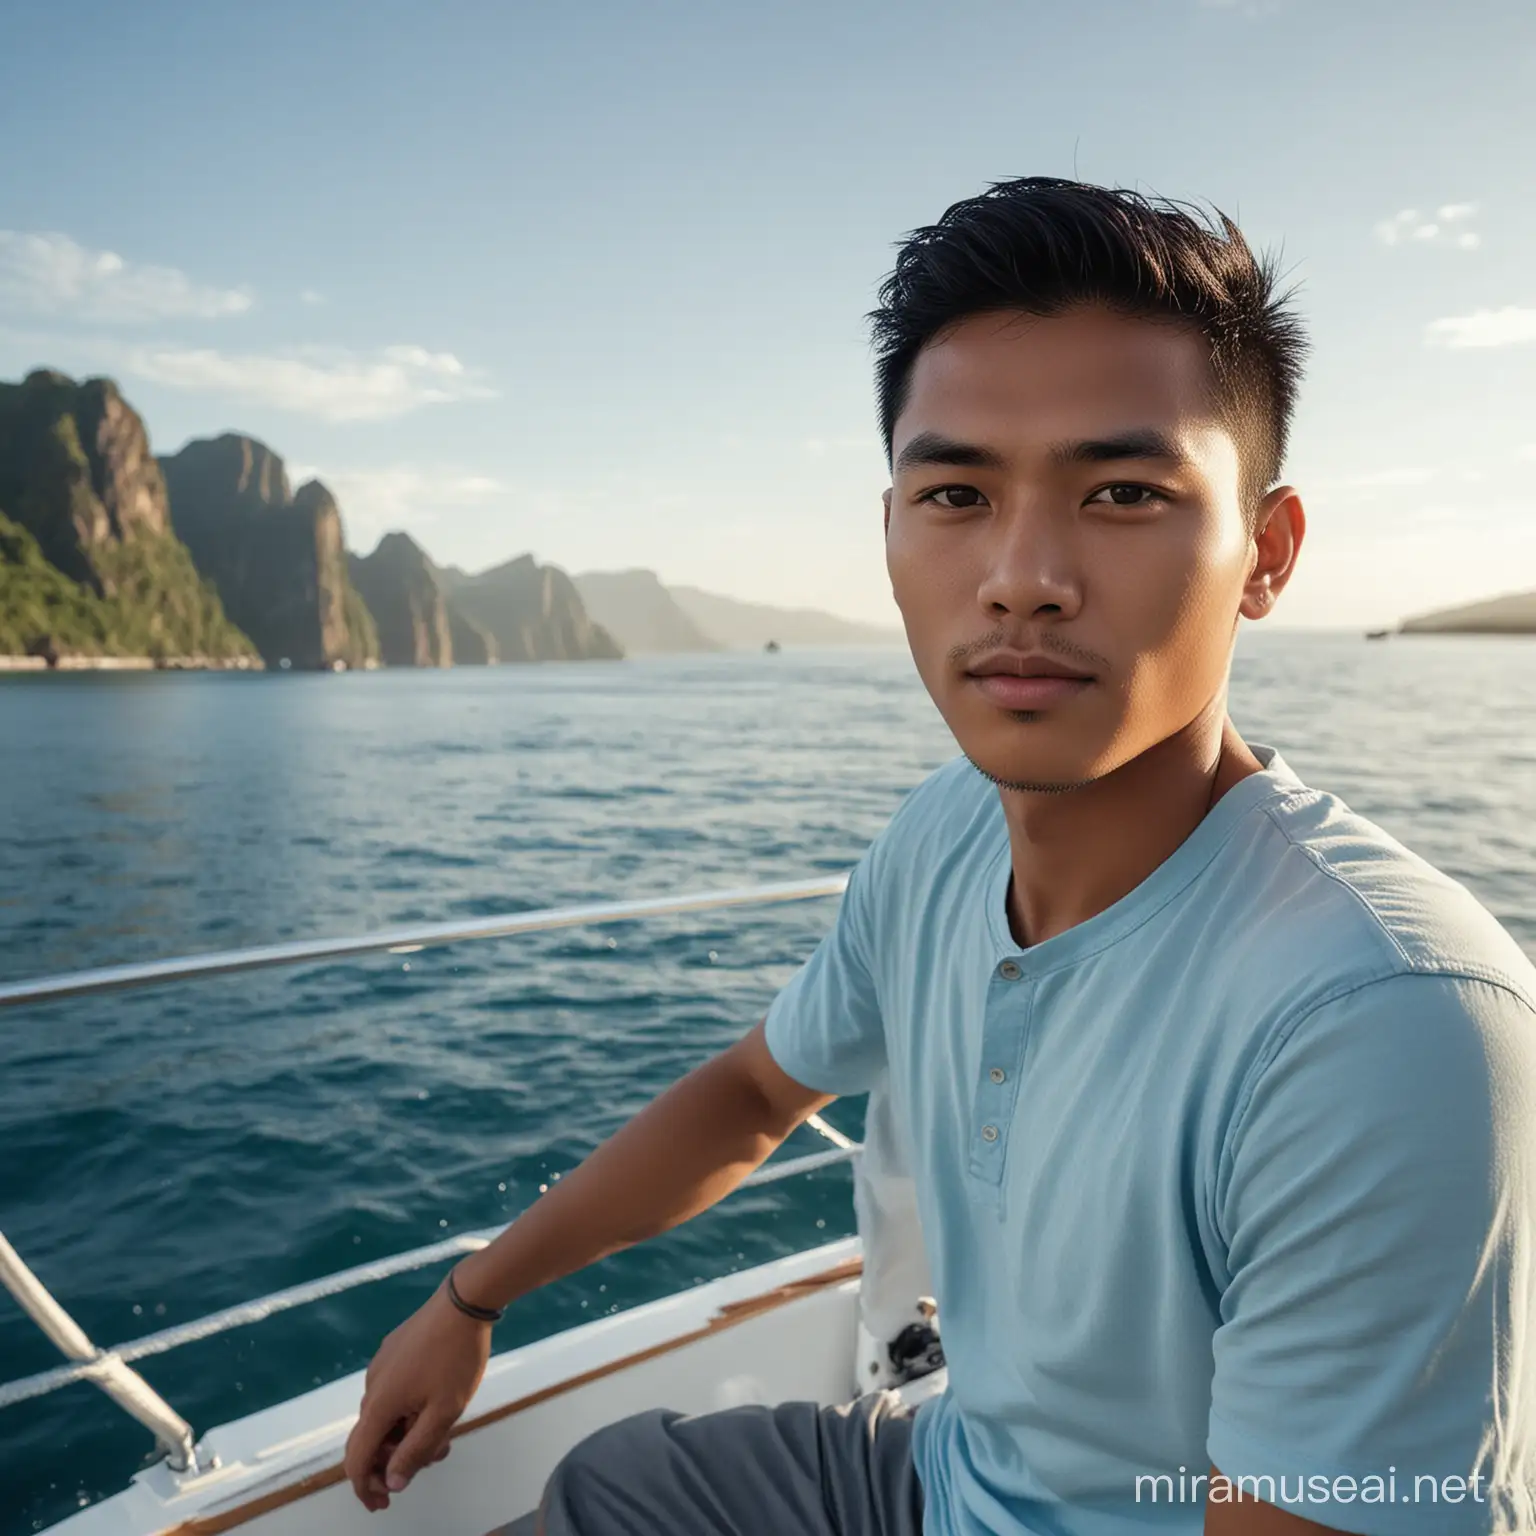 Indonesian Man Relaxing on Luxurious Boat in Clear Seascape